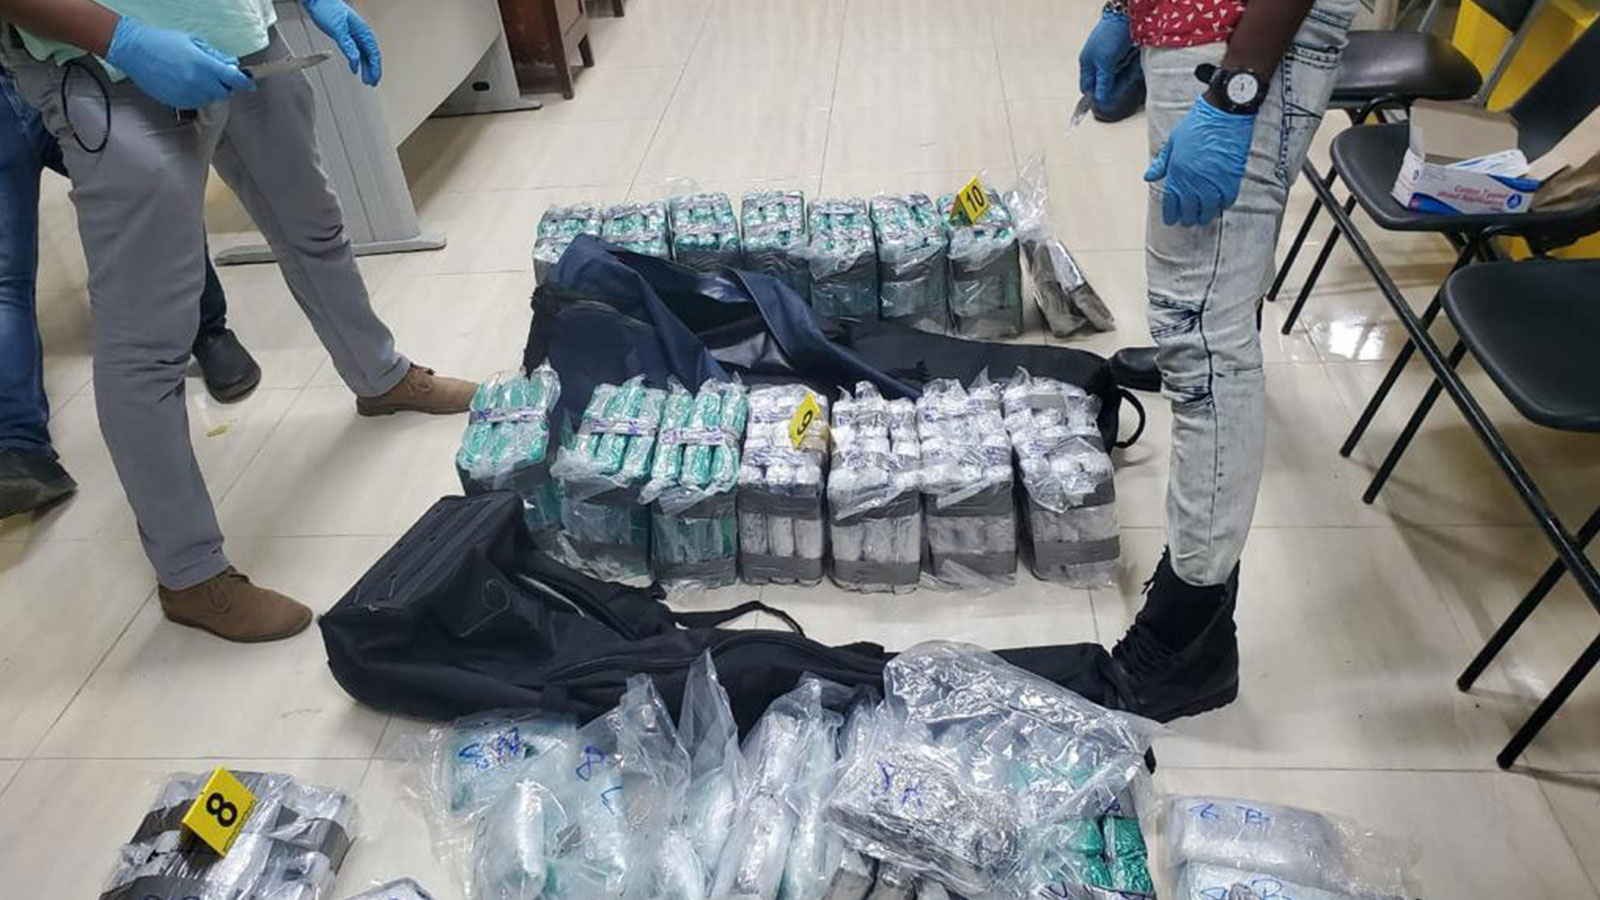 Operation Trigger VII - Authorities in Jamaica, with support from US law enforcement, made a record-setting bust: 500.2 kg of cocaine.